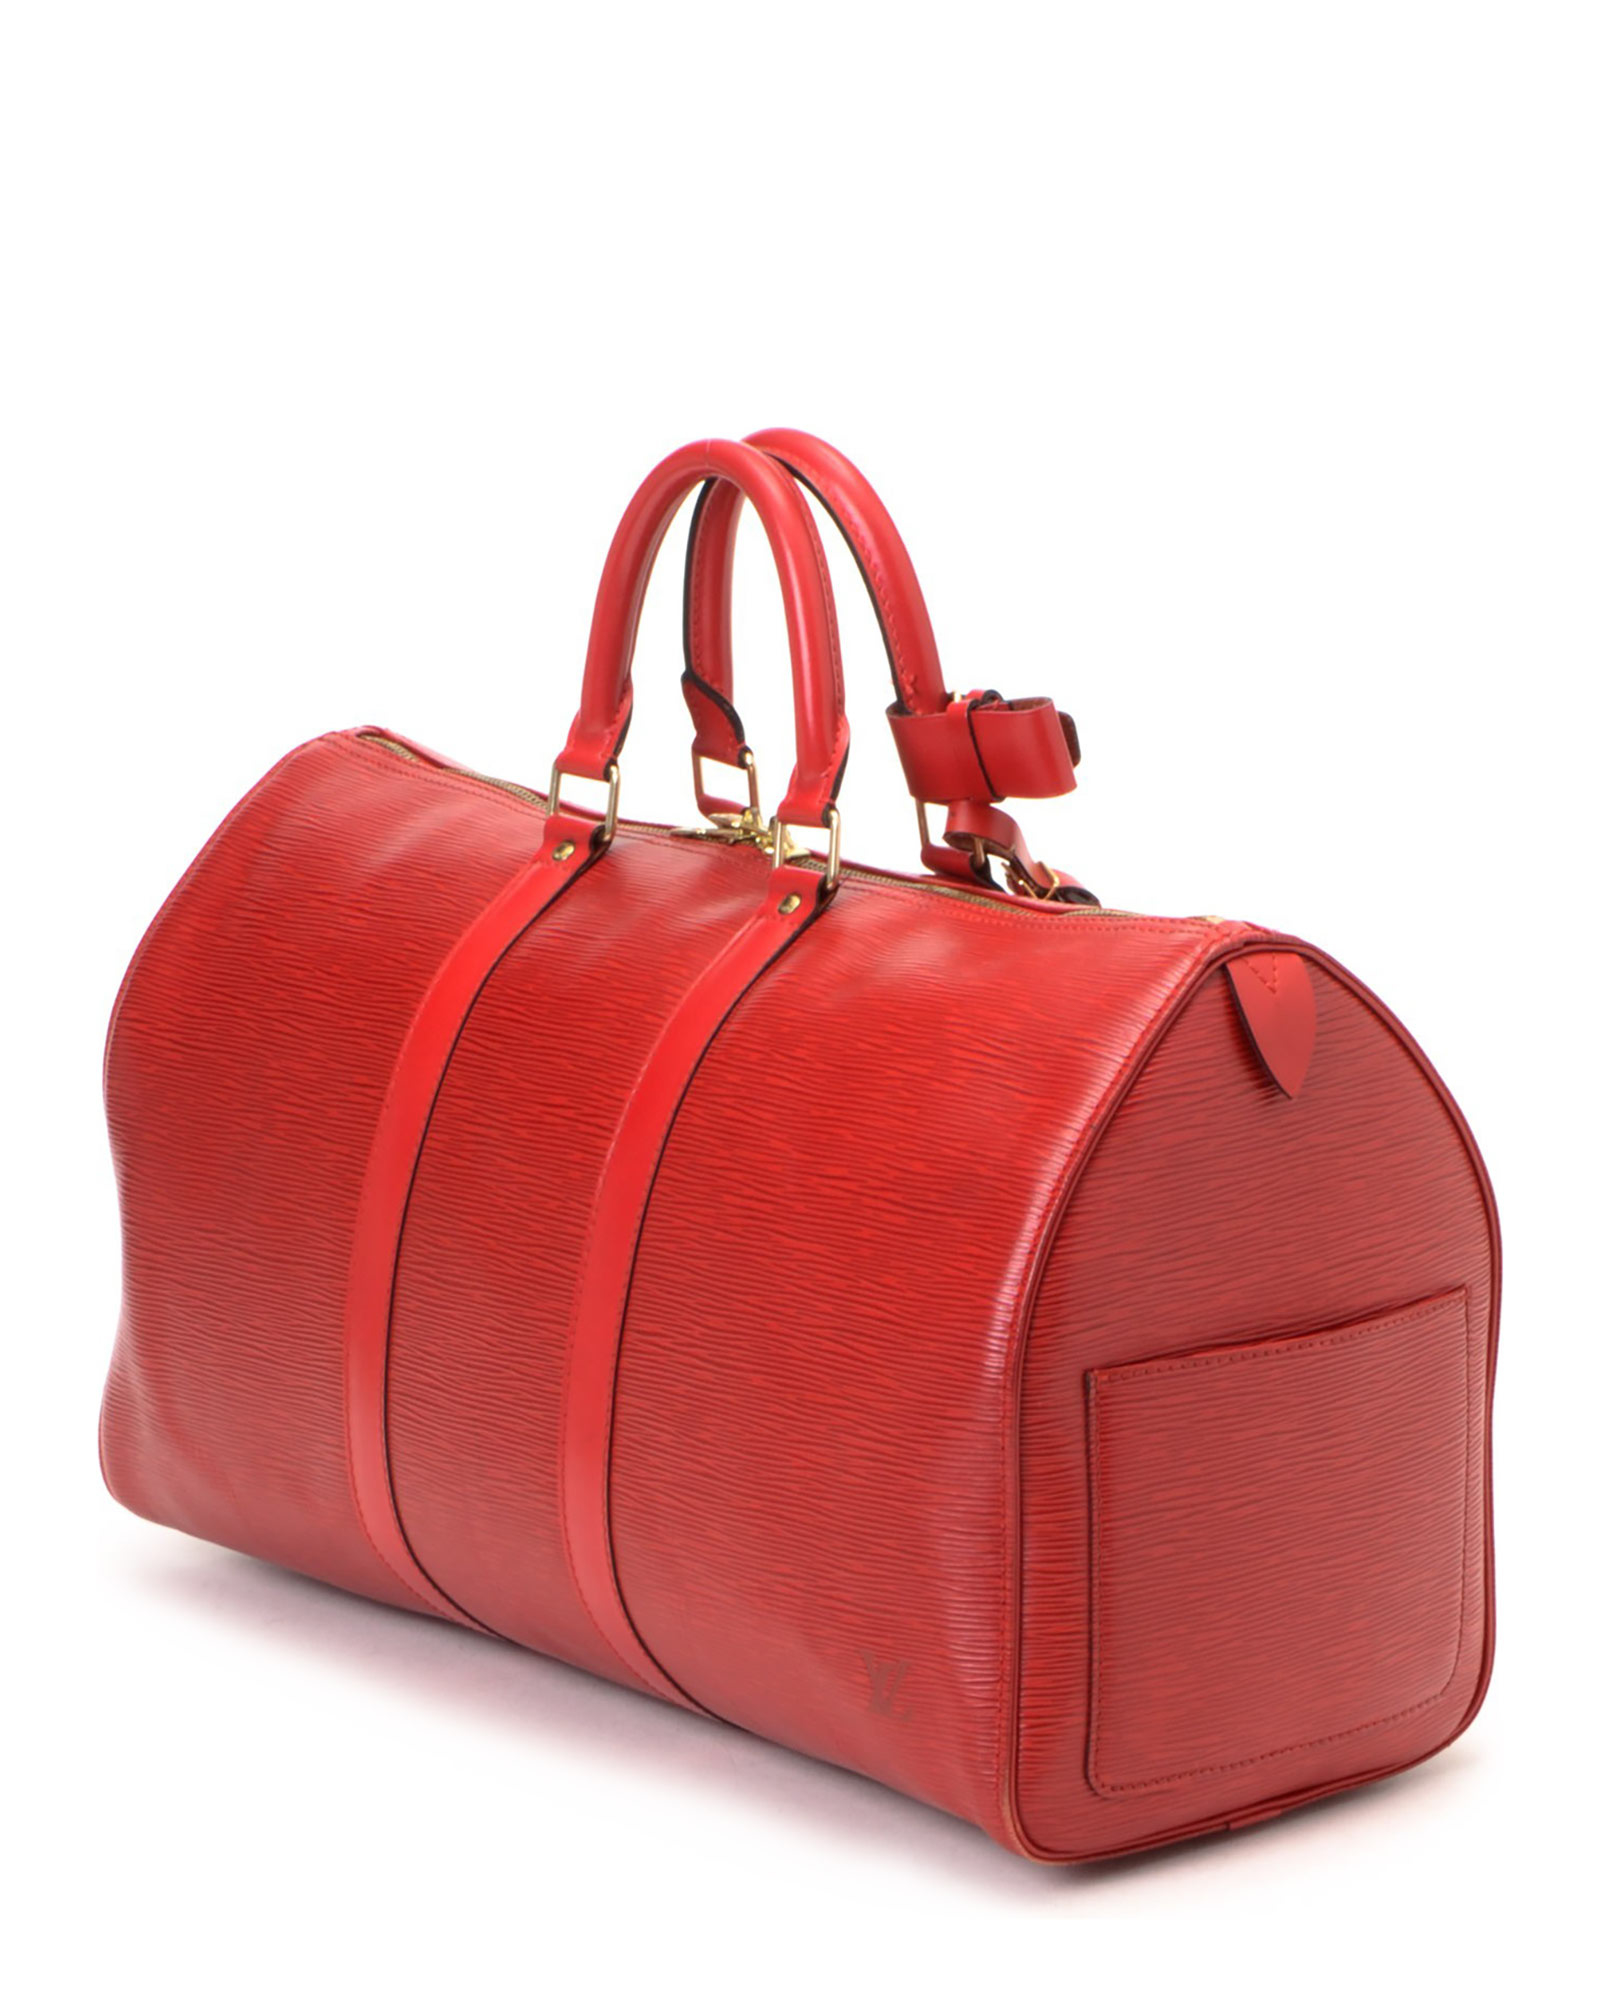 Lyst - Louis Vuitton Red Travel Bag - Vintage in Red for Men